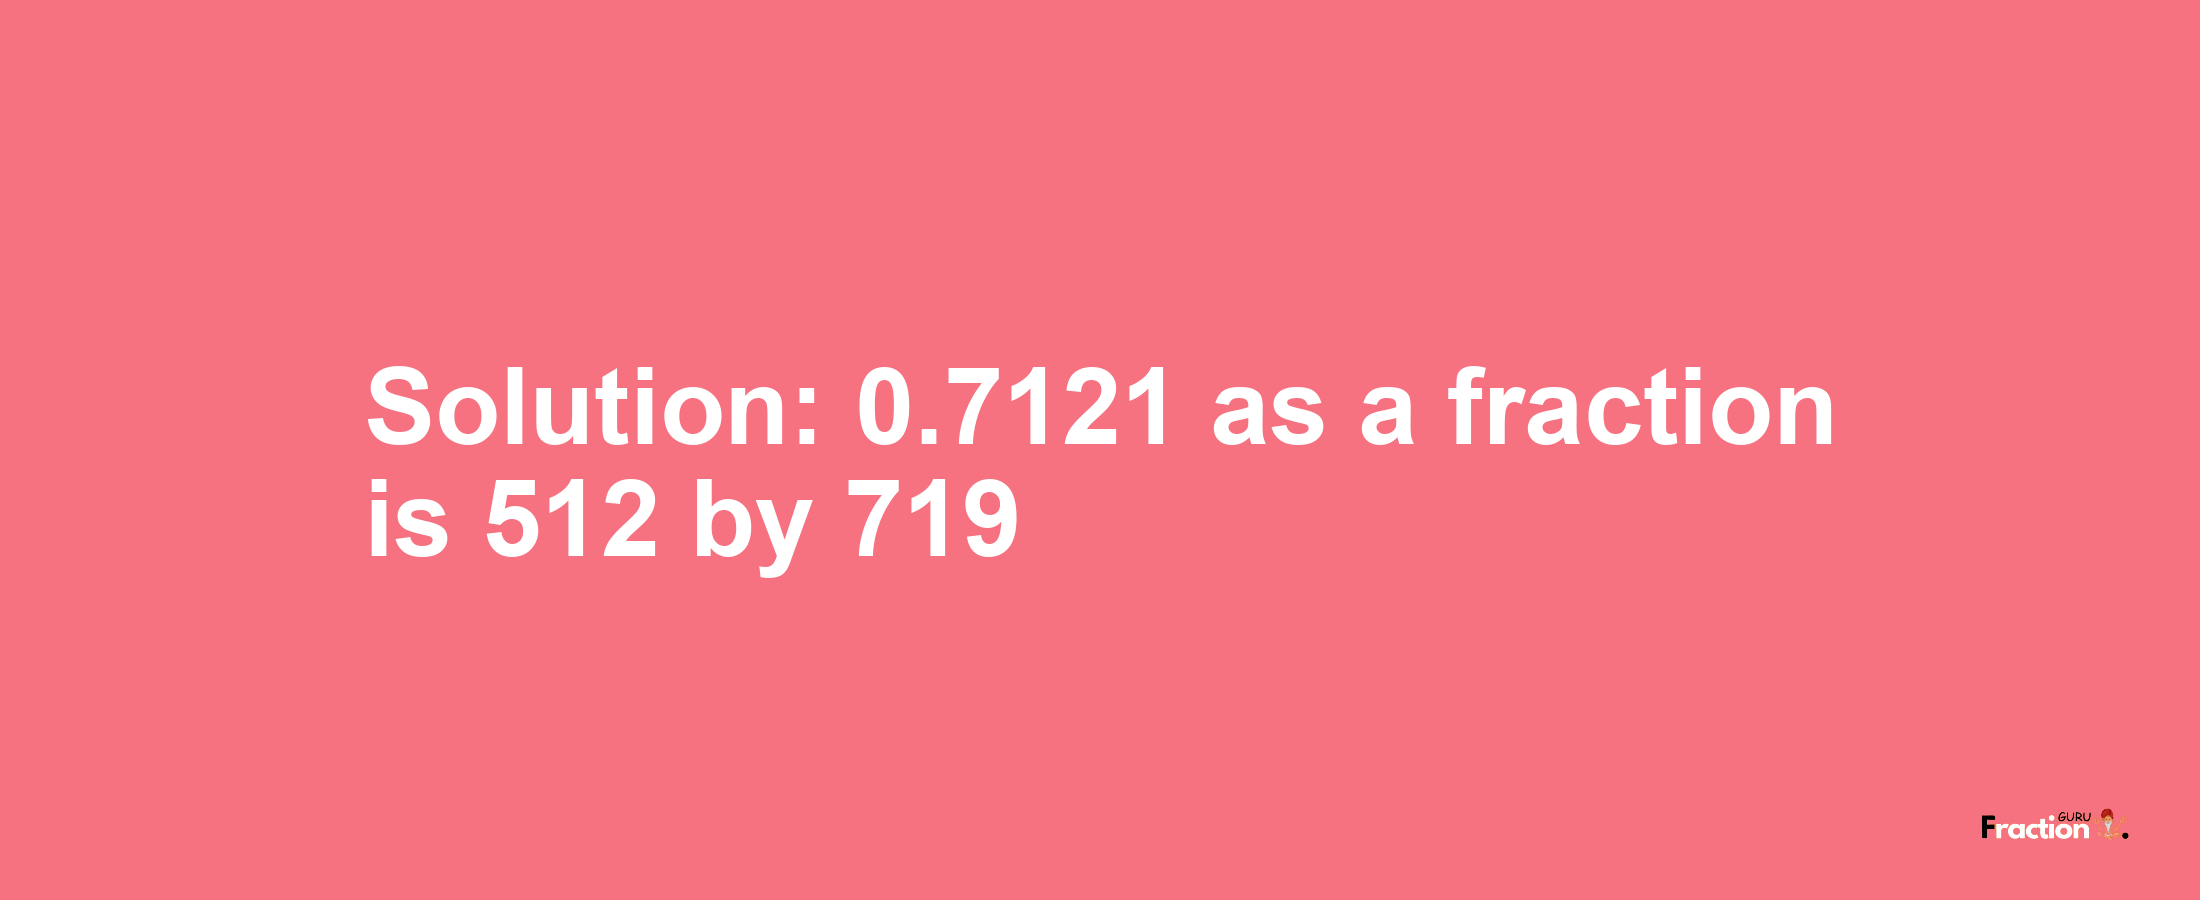 Solution:0.7121 as a fraction is 512/719